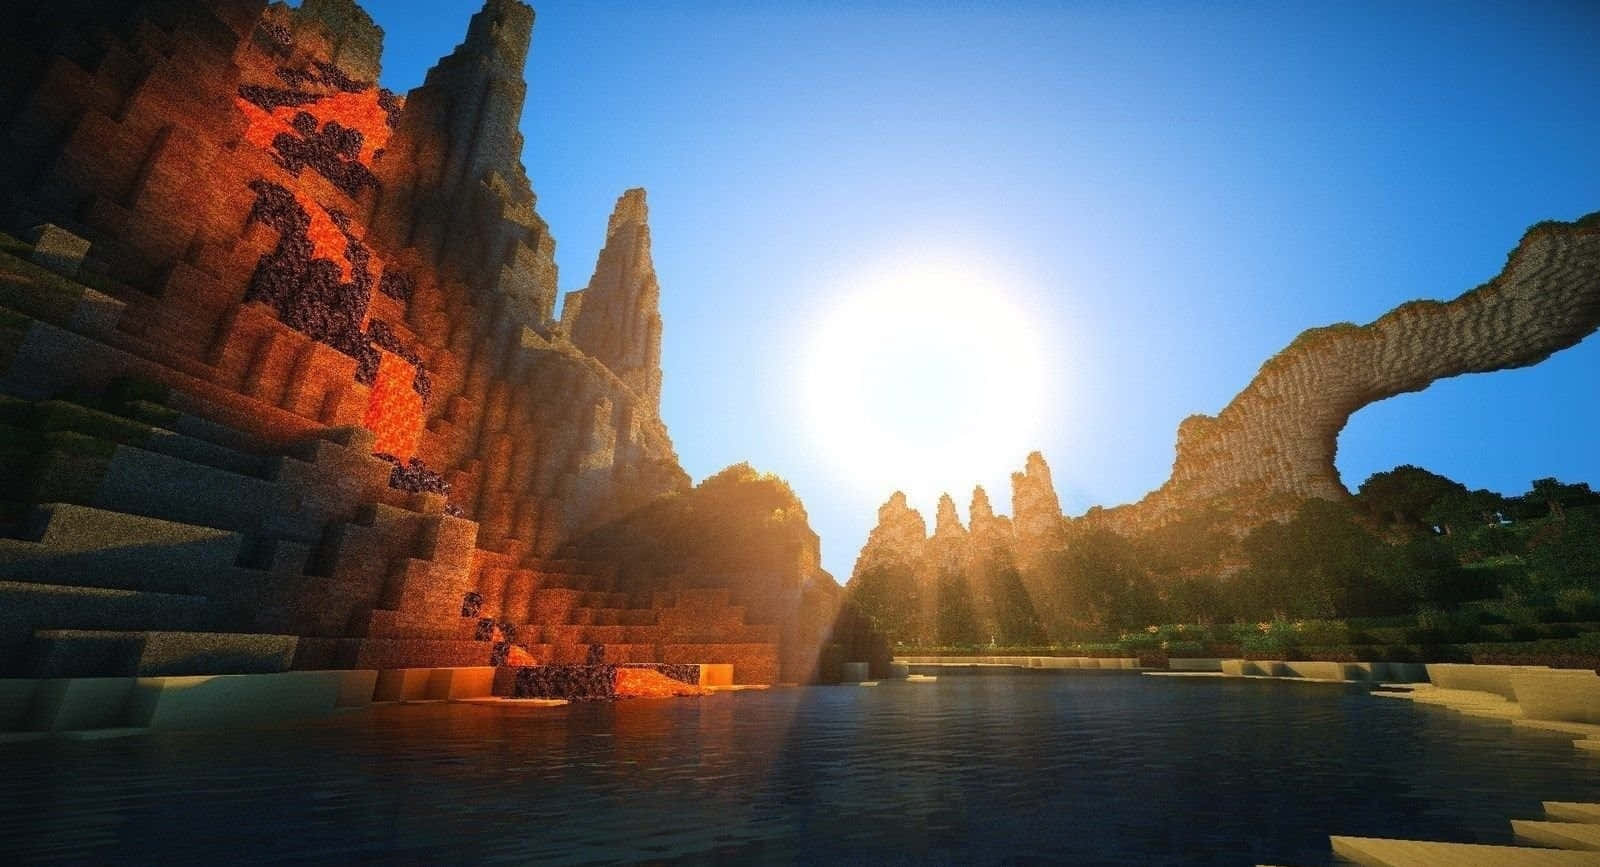 minecraft backgrounds shaders